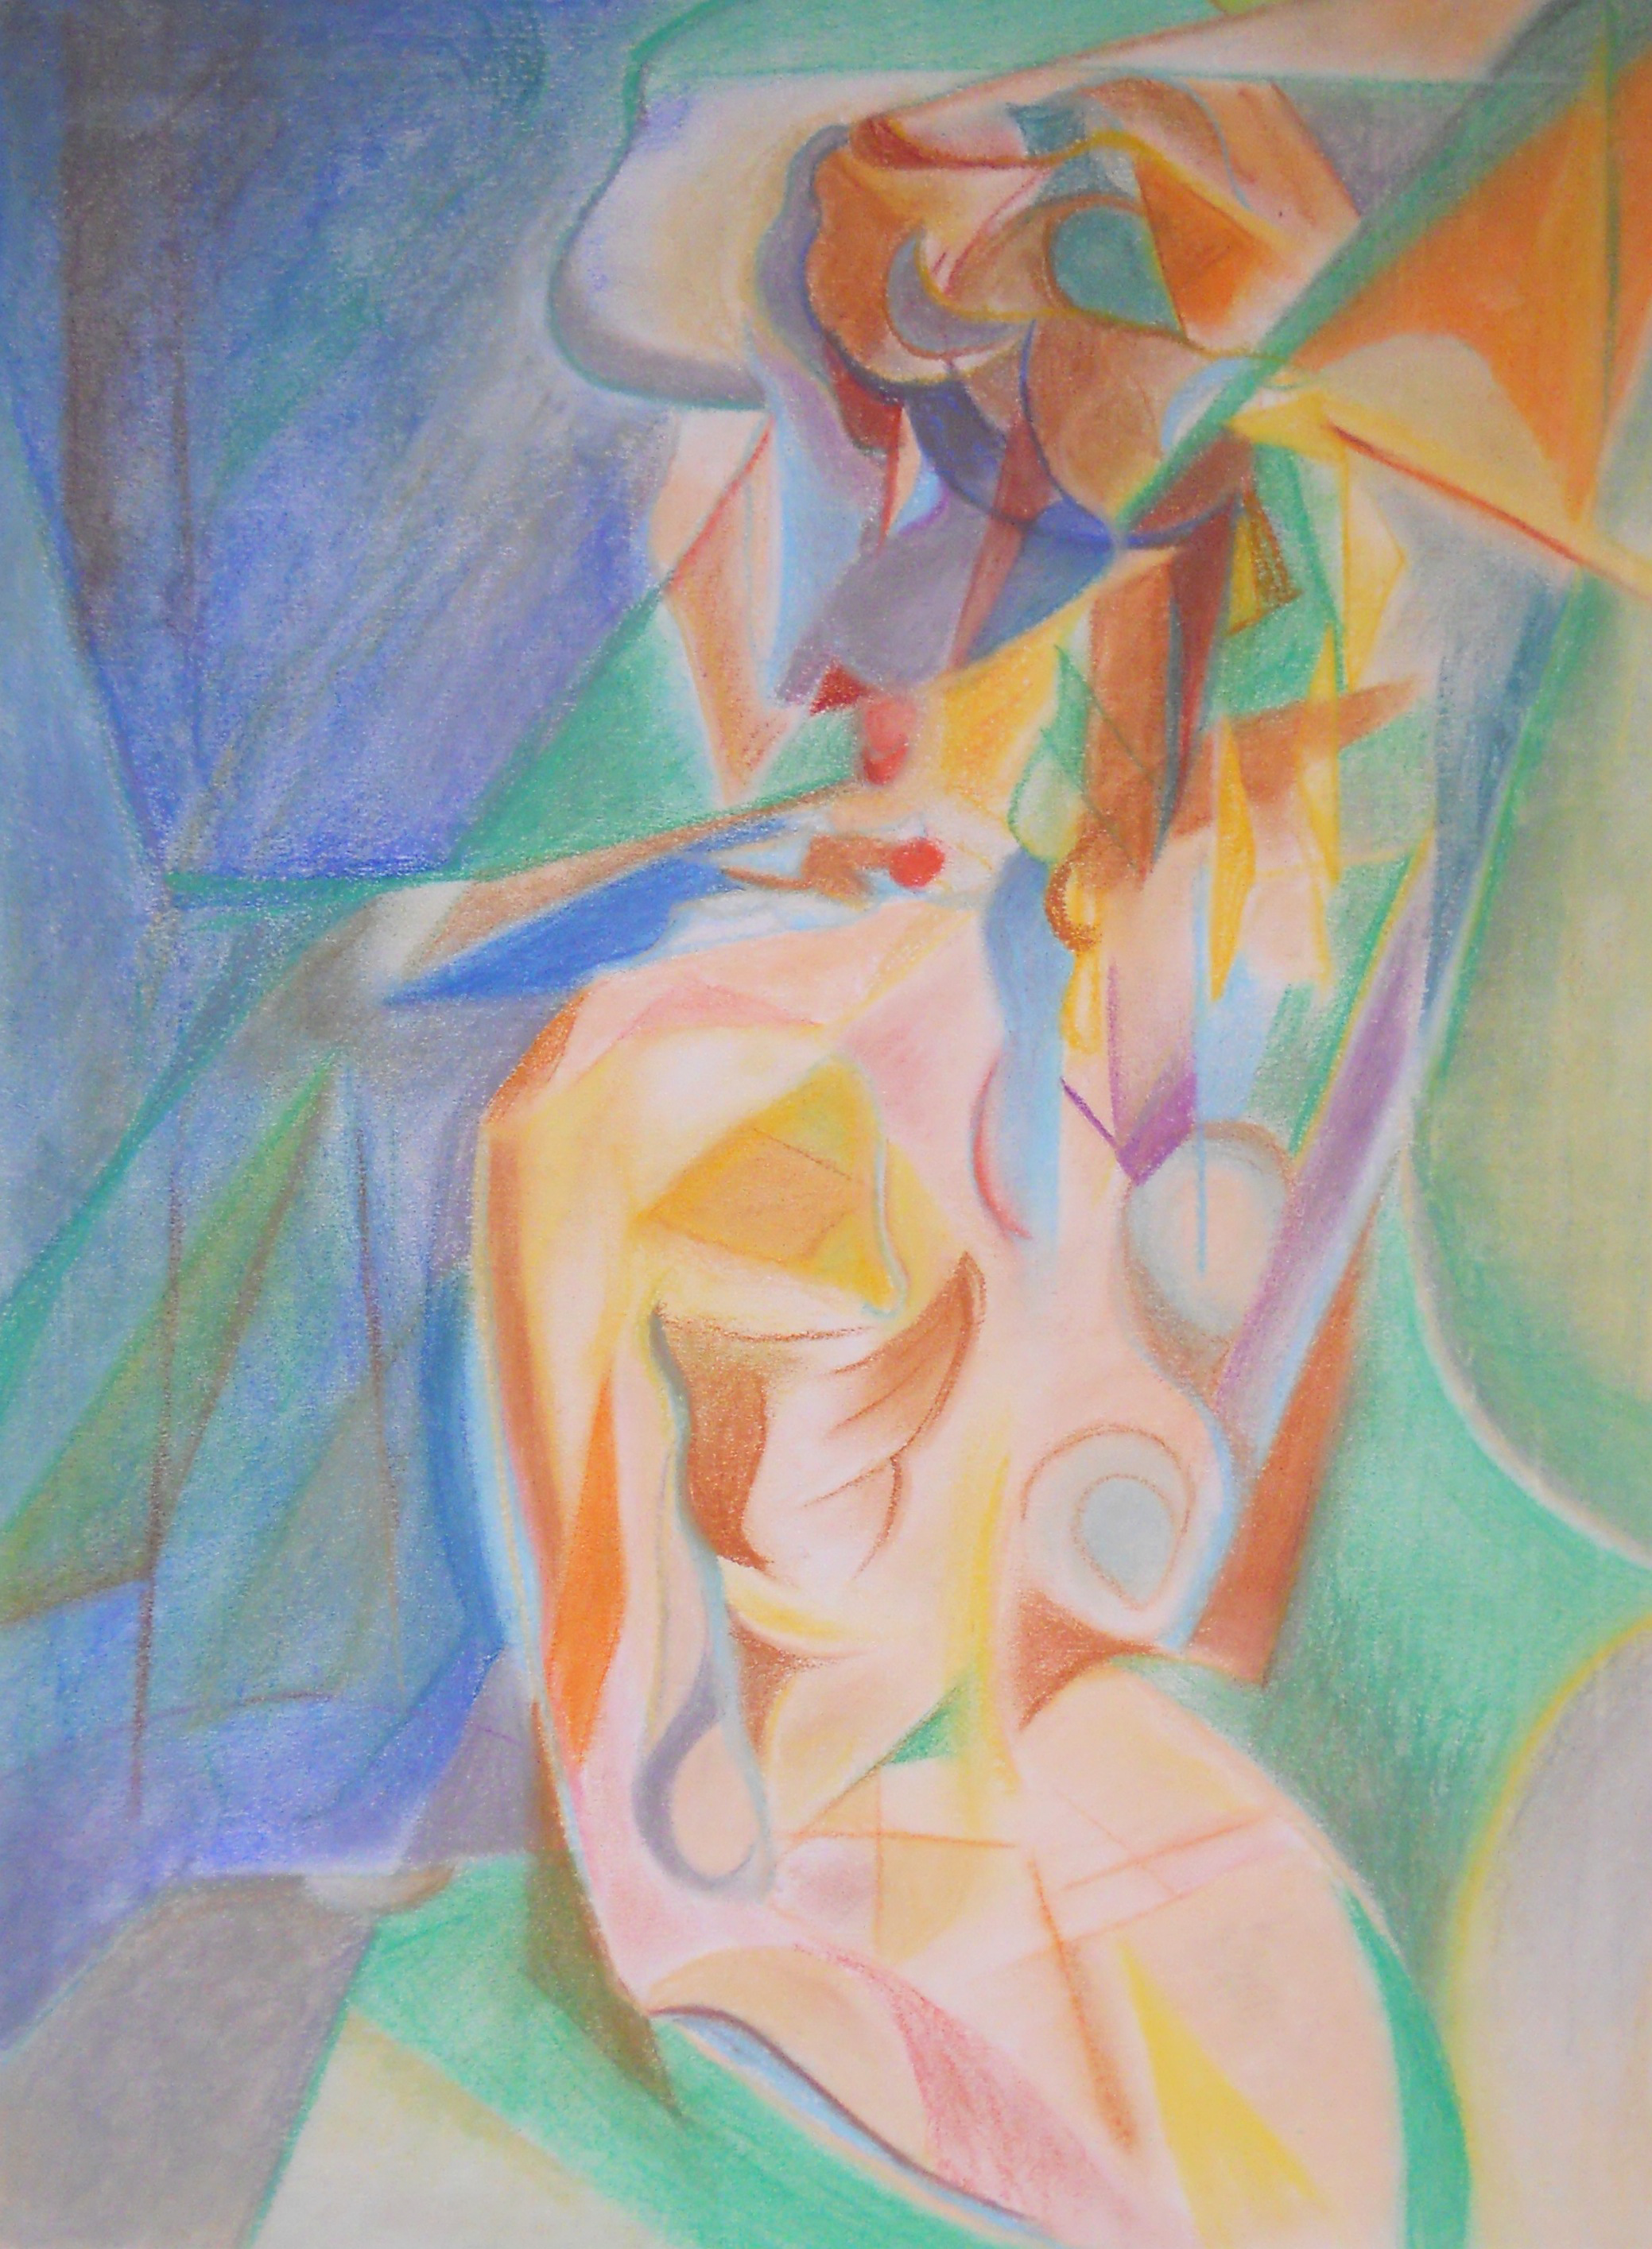  Pastel on paper, from life.  Circa 2009. 